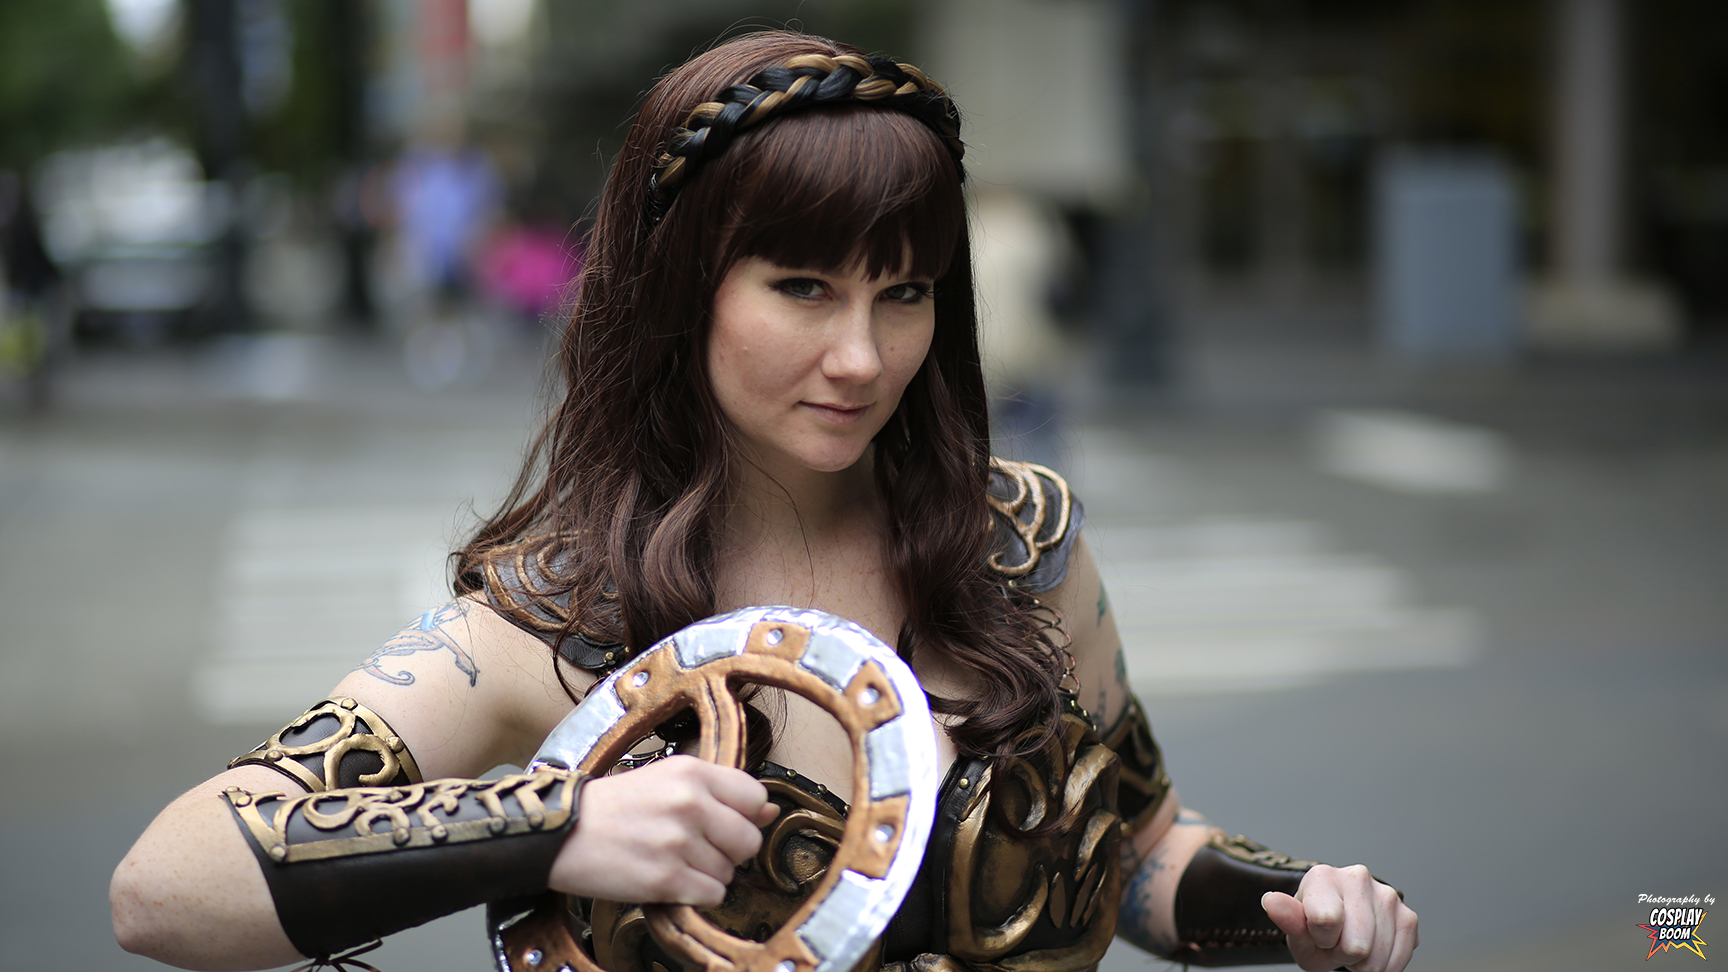 The Coolest Cosplay From Geek Girl Con